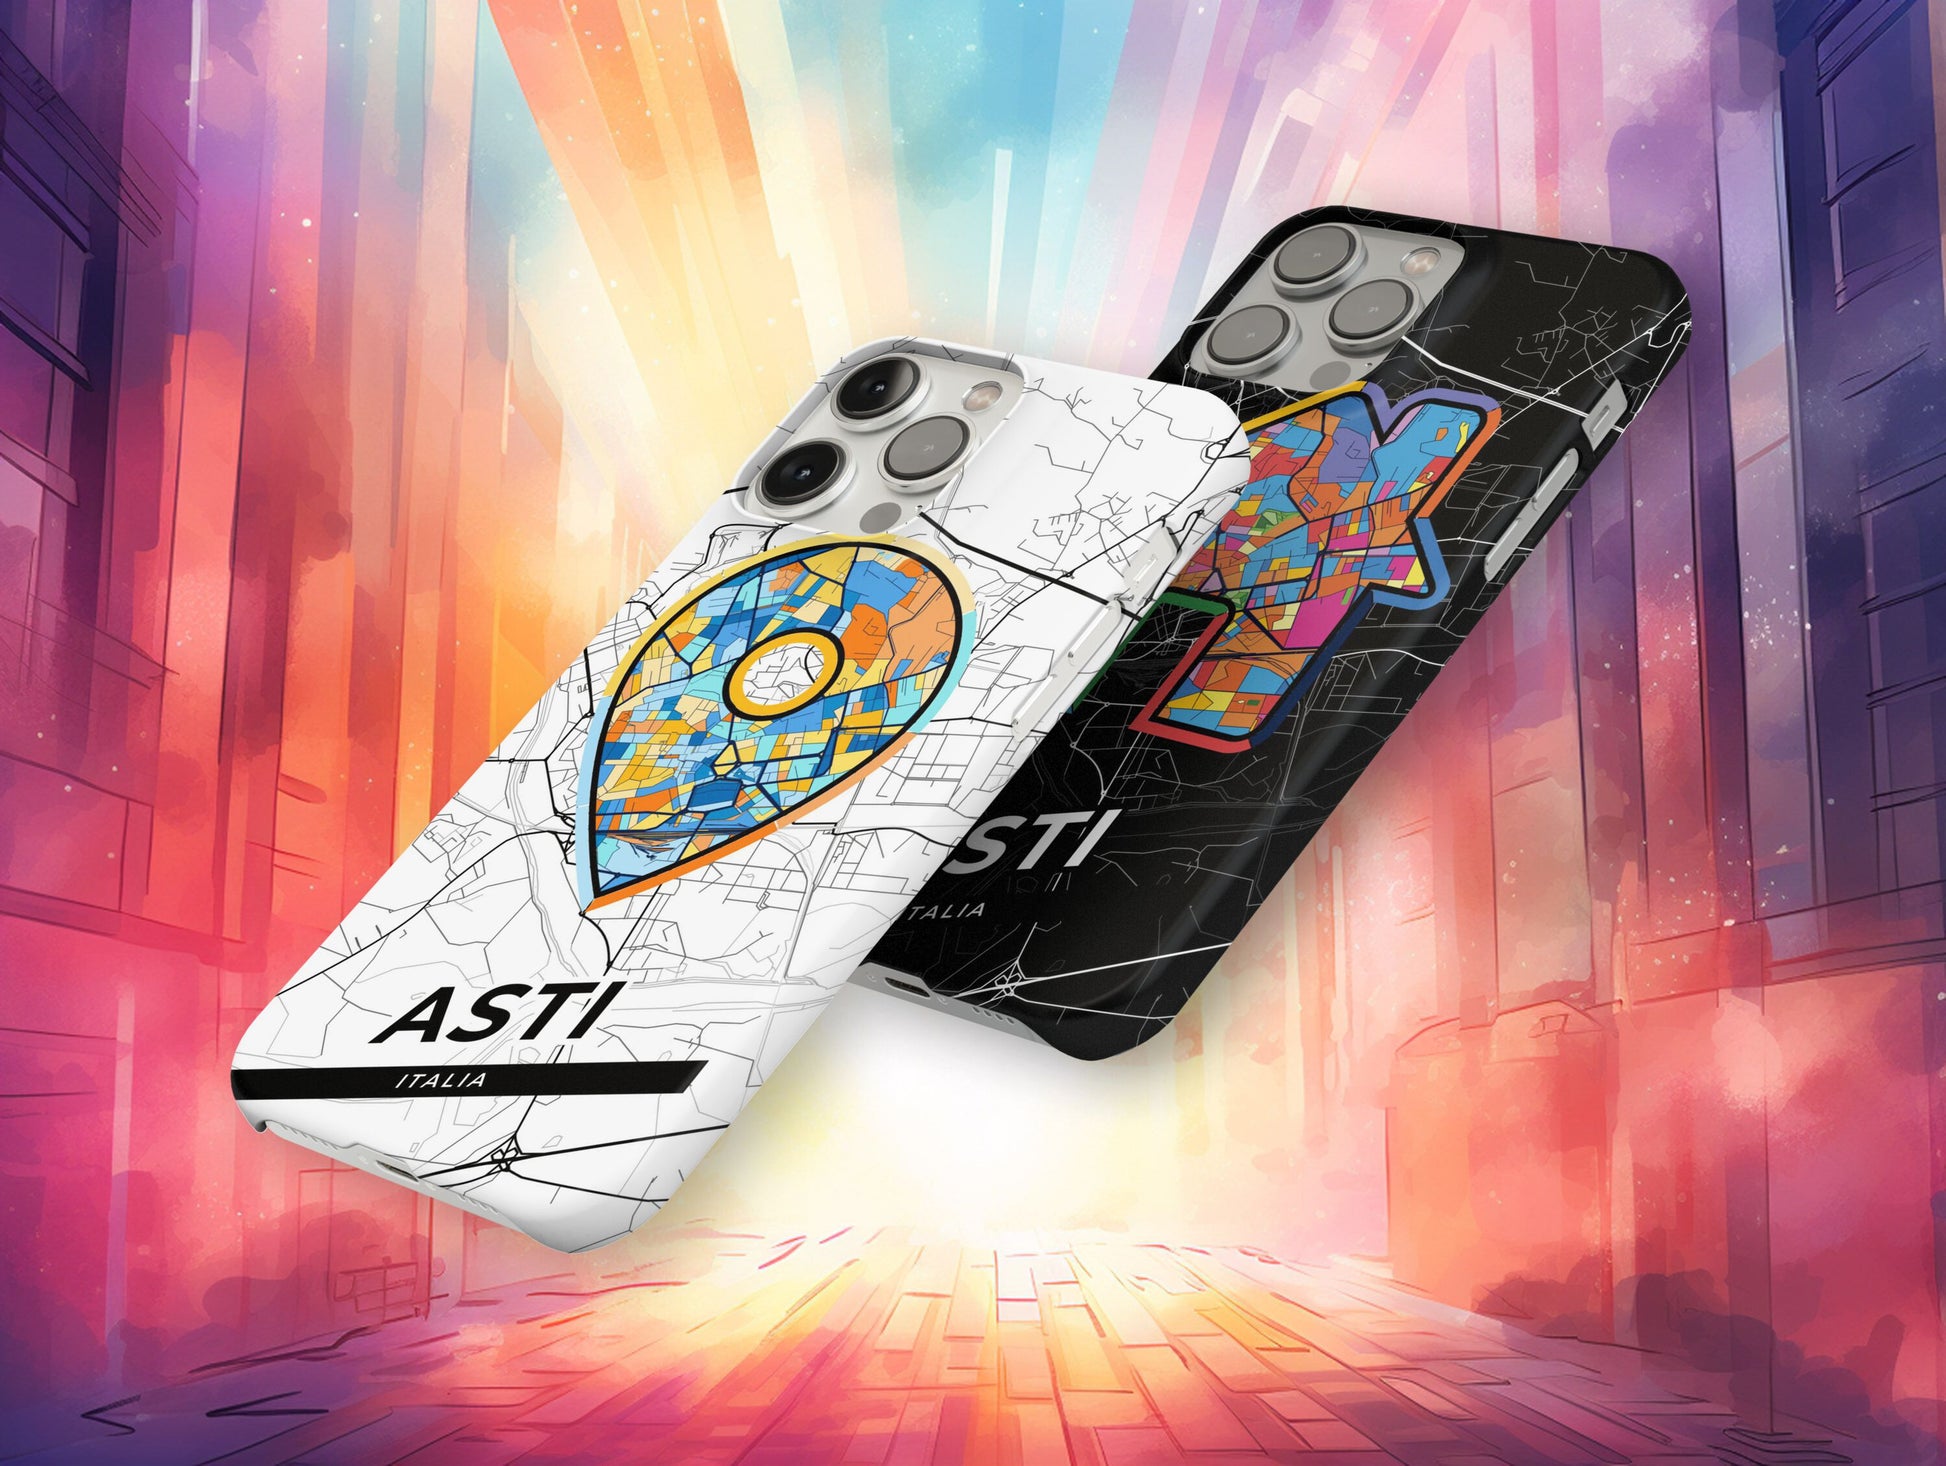 Asti Italy slim phone case with colorful icon. Birthday, wedding or housewarming gift. Couple match cases.